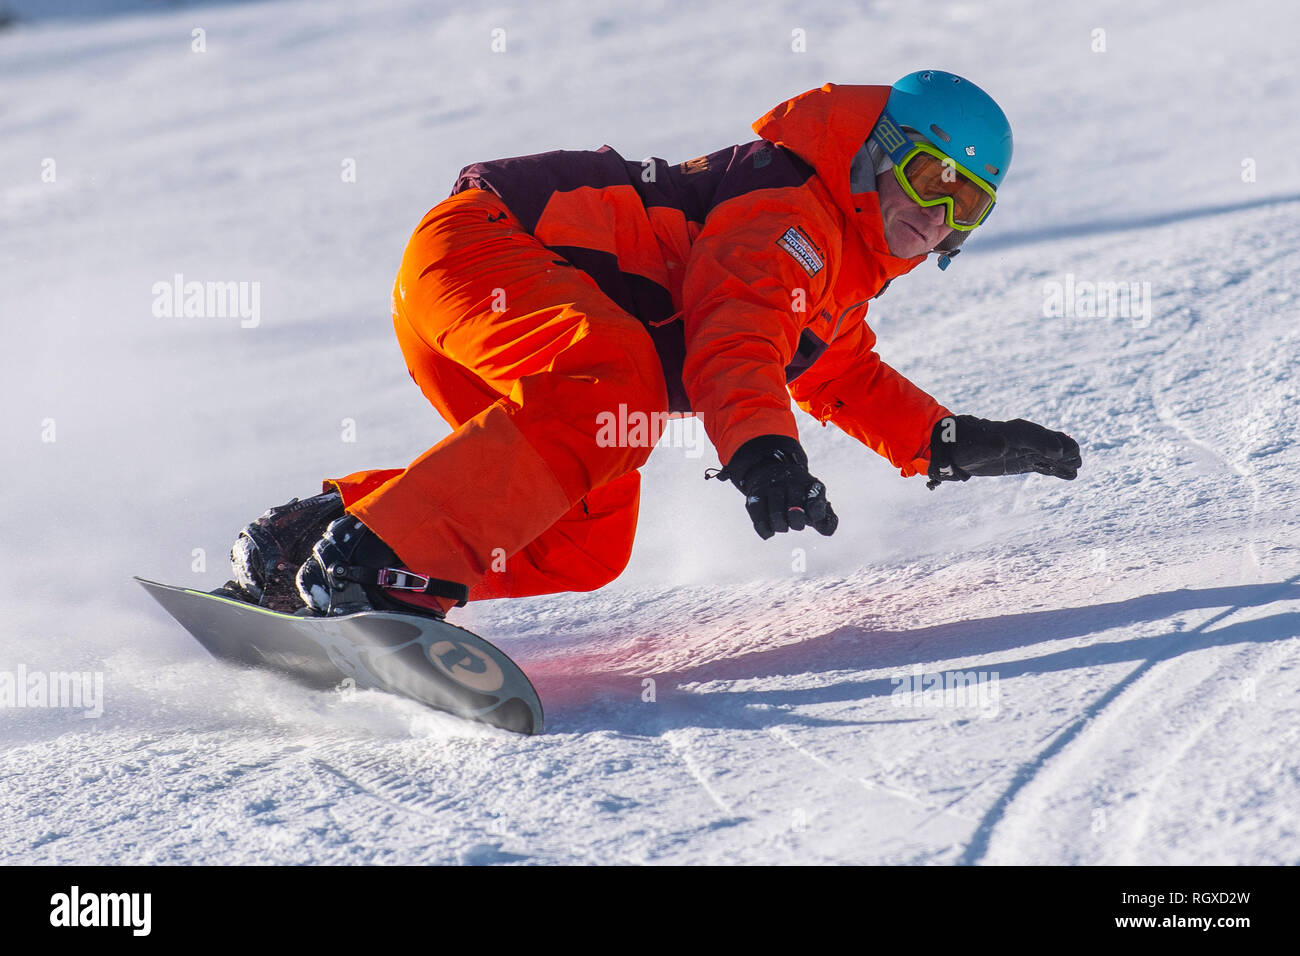 A male snowboarder carves a turn on piste in the French alpine resort of Courchevel. Stock Photo